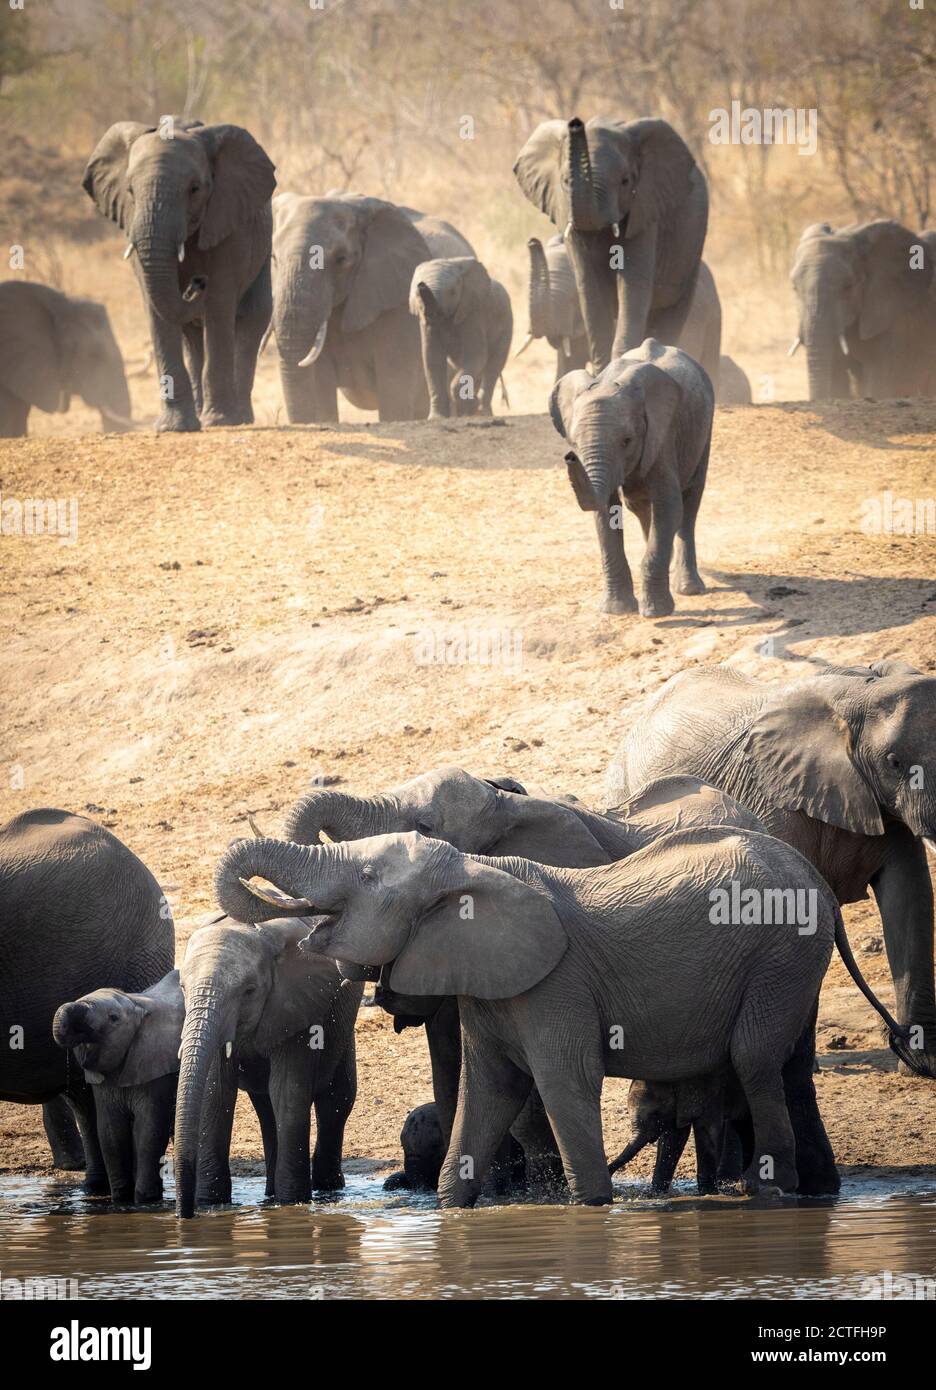 Large elephant herd standing in shallow water drinking in Kruger Park in South Africa Stock Photo